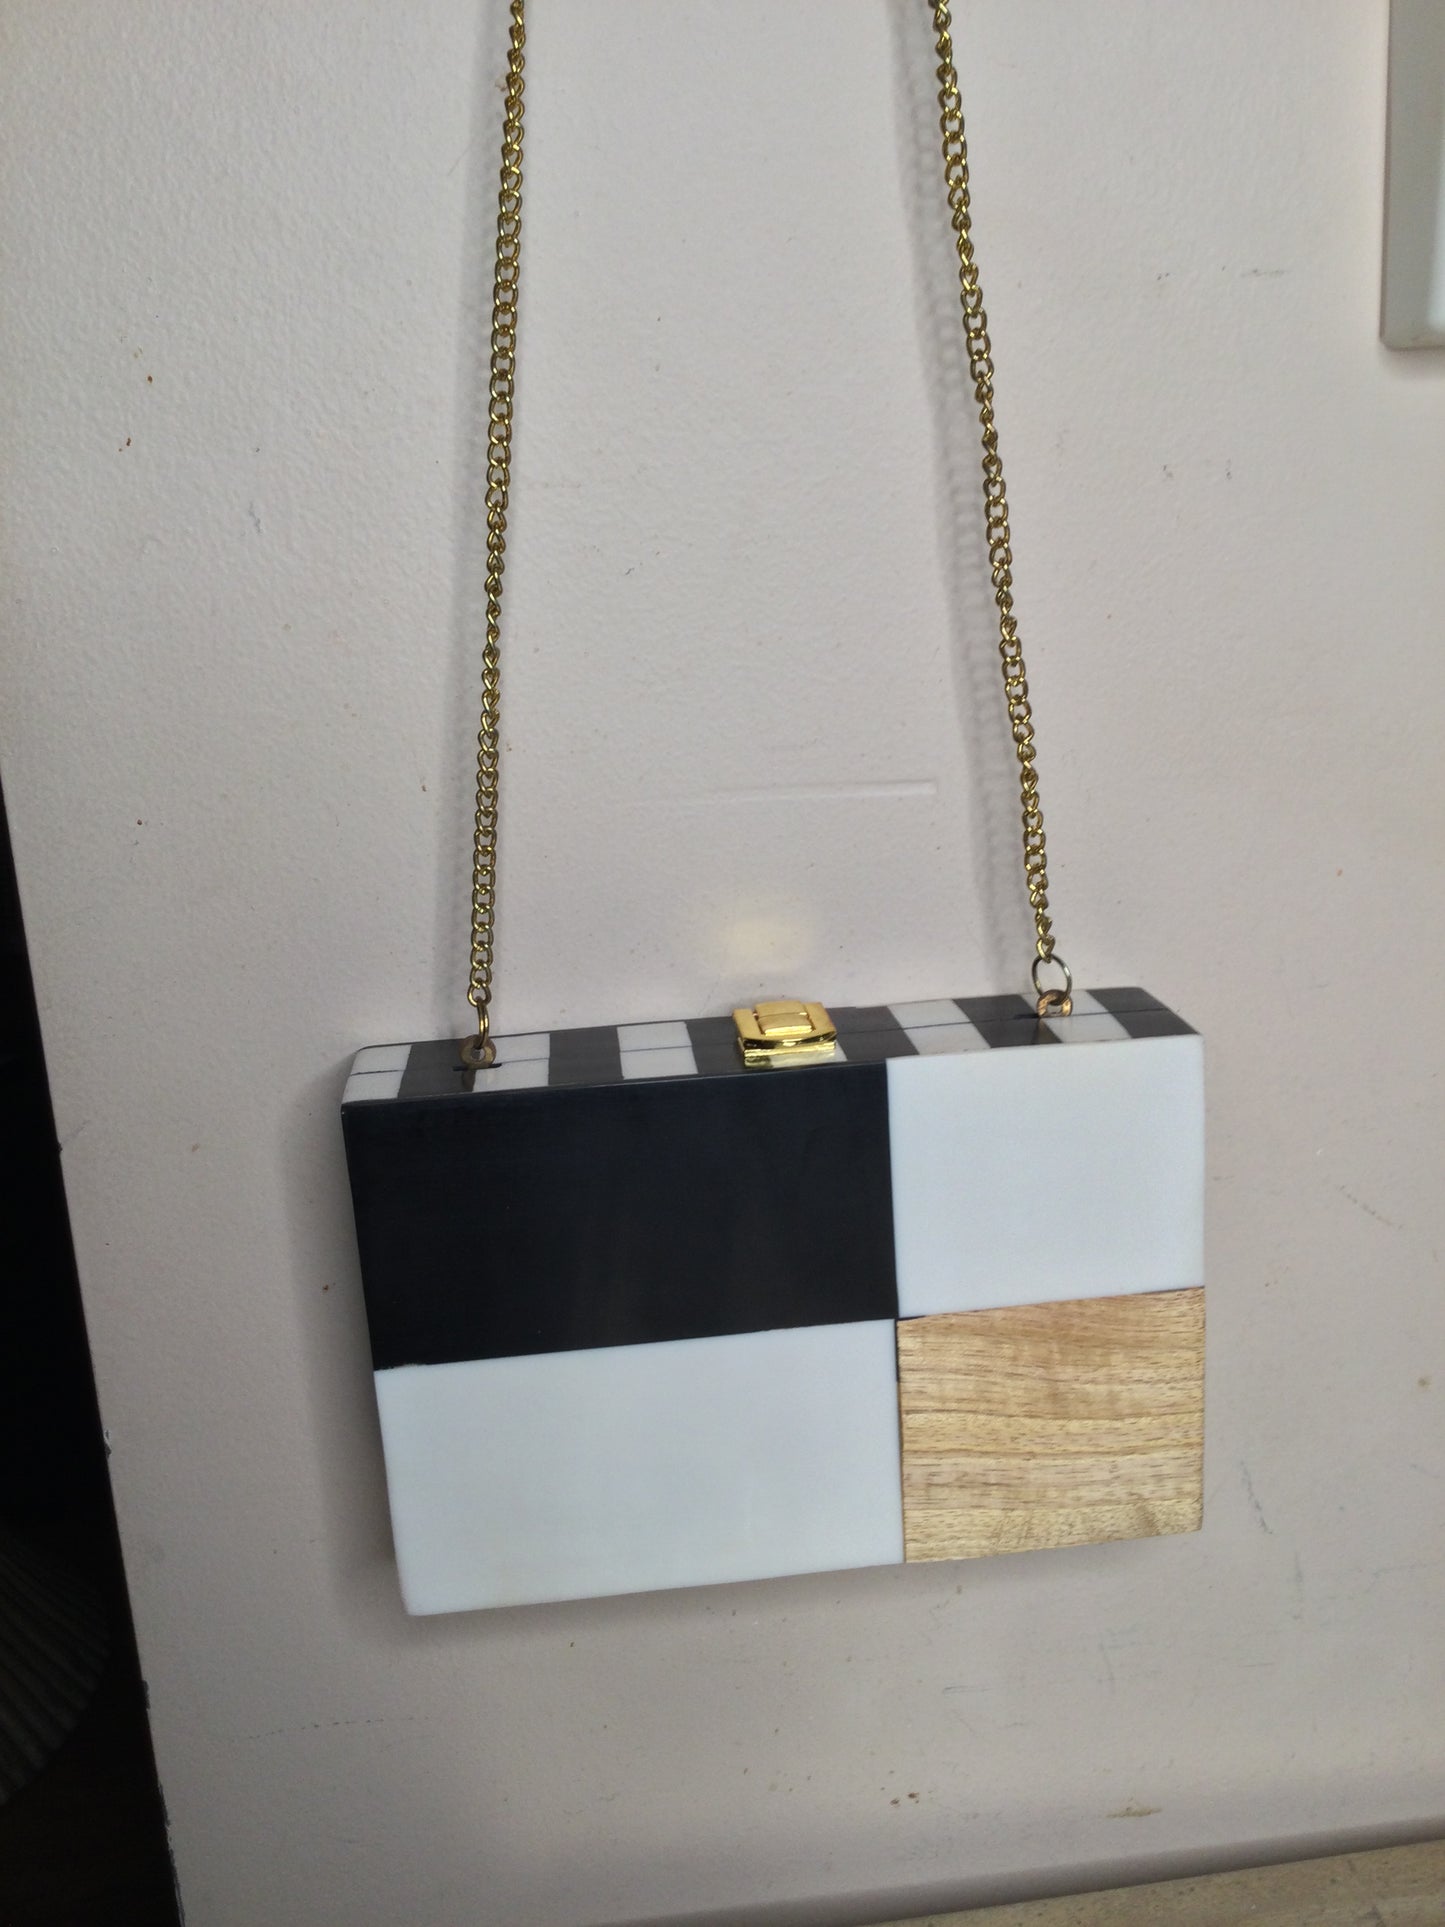 Resin and wood Clutch/purse